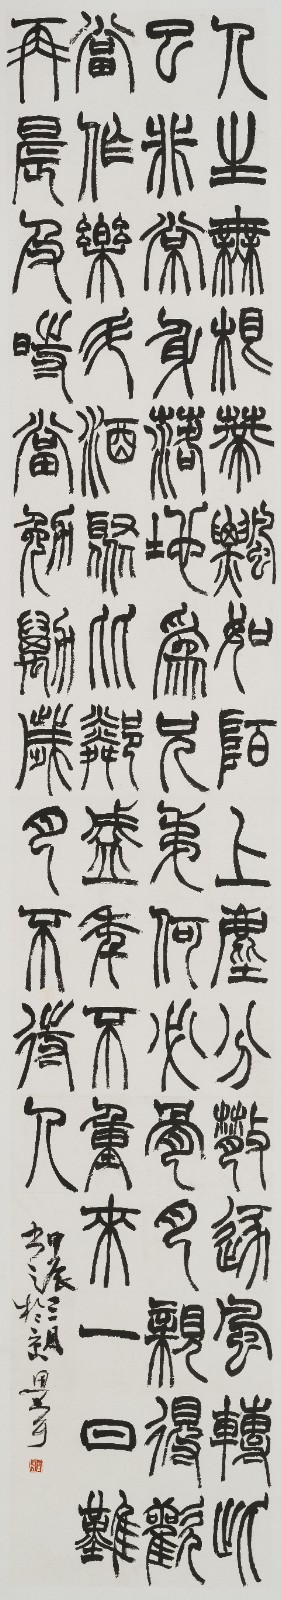 07 Tao Yuanming’s “Miscellaneous Poems” in Seal Script, 39.5cm×240cm, Calligraphy on paper, 2024.jpg